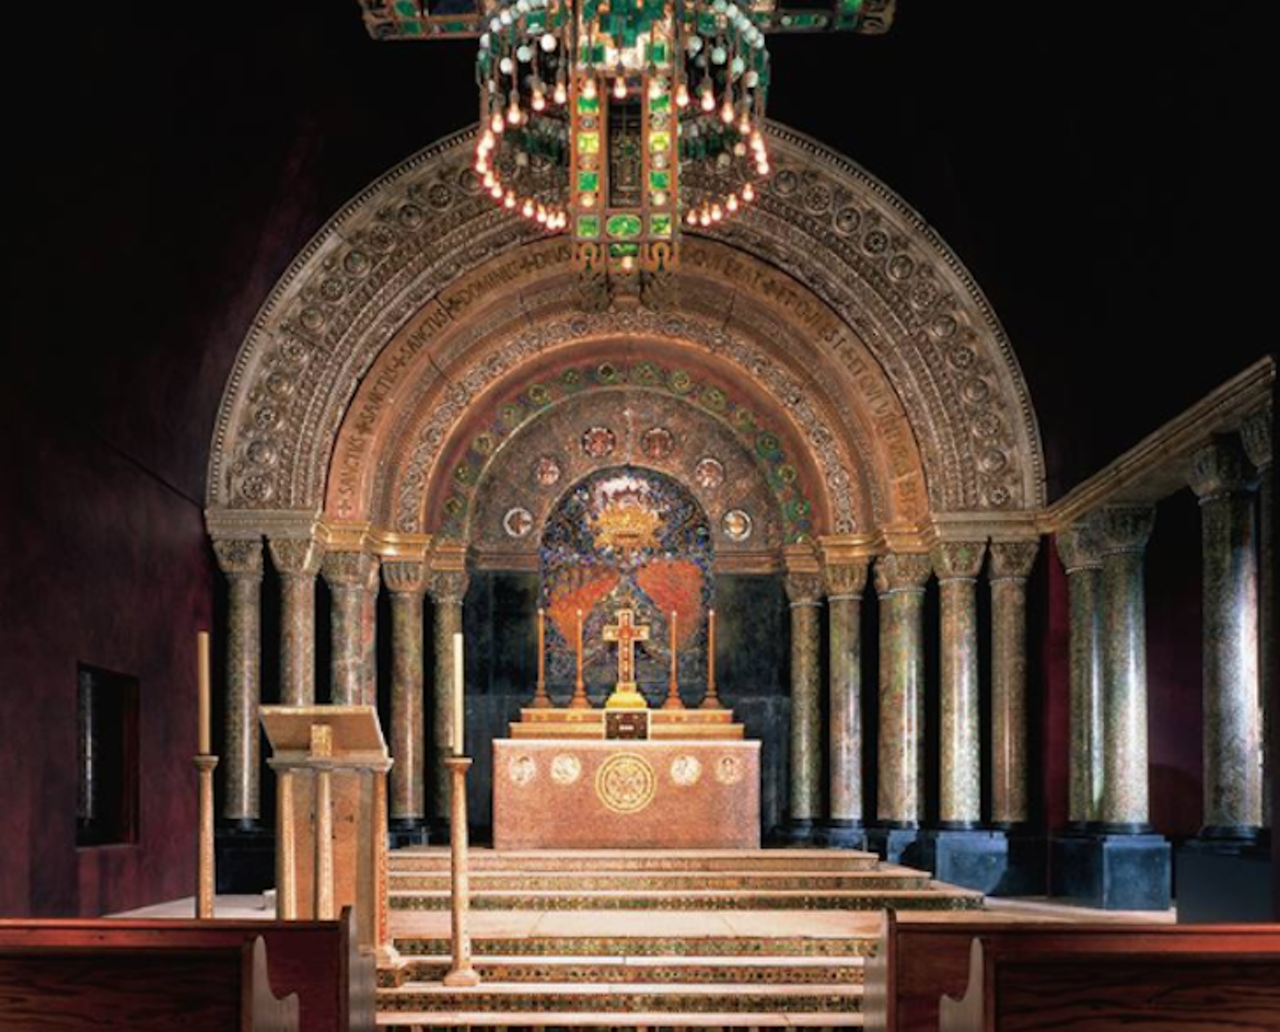 Tiffany Chapel
445 N. Park Ave., Winter Park | 407-645-5311
Louis Comfort Tiffany made a name for himself at the 1893 Chicago World Fair with his outstanding stained glass chapel. And thanks to the careful reconstruction work of the Morse Museum, residents of Orlando get to experience the wonder of this Tiffany&#146;s iconic chapel any day of the year.
Photo via The Charles Hosmer Morse Museum of American Art/Facebook